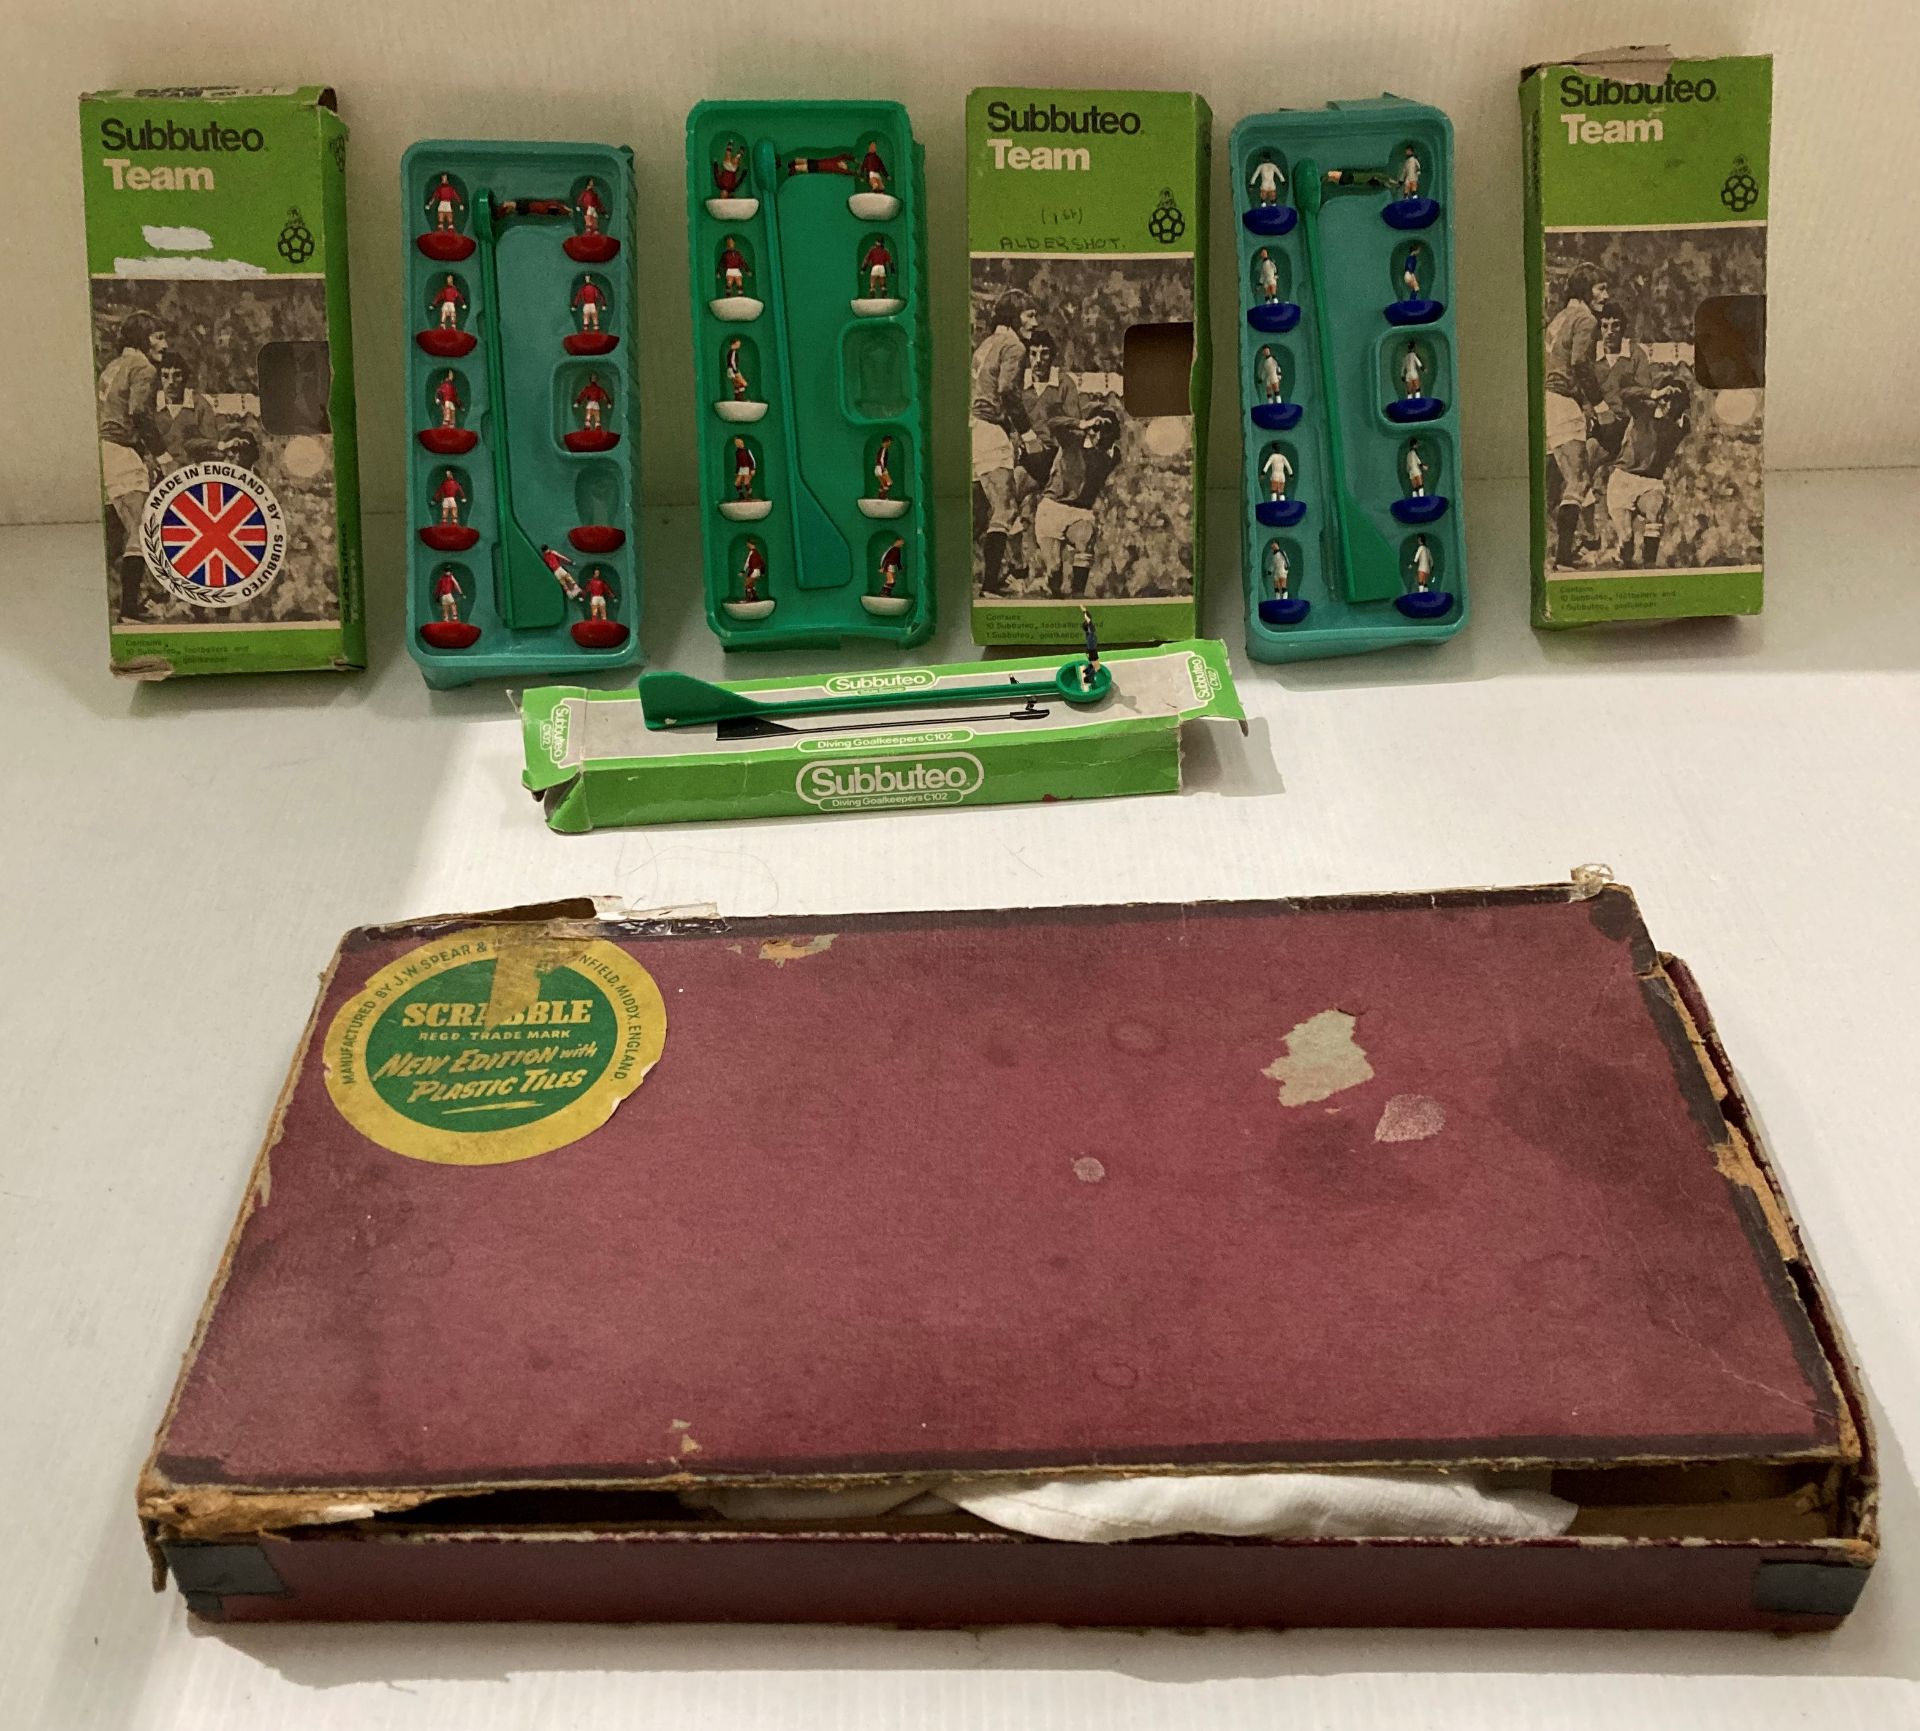 Subbuteo Team 327 West Ham United 2nd including ten players (one player in blue) and goalie in box,